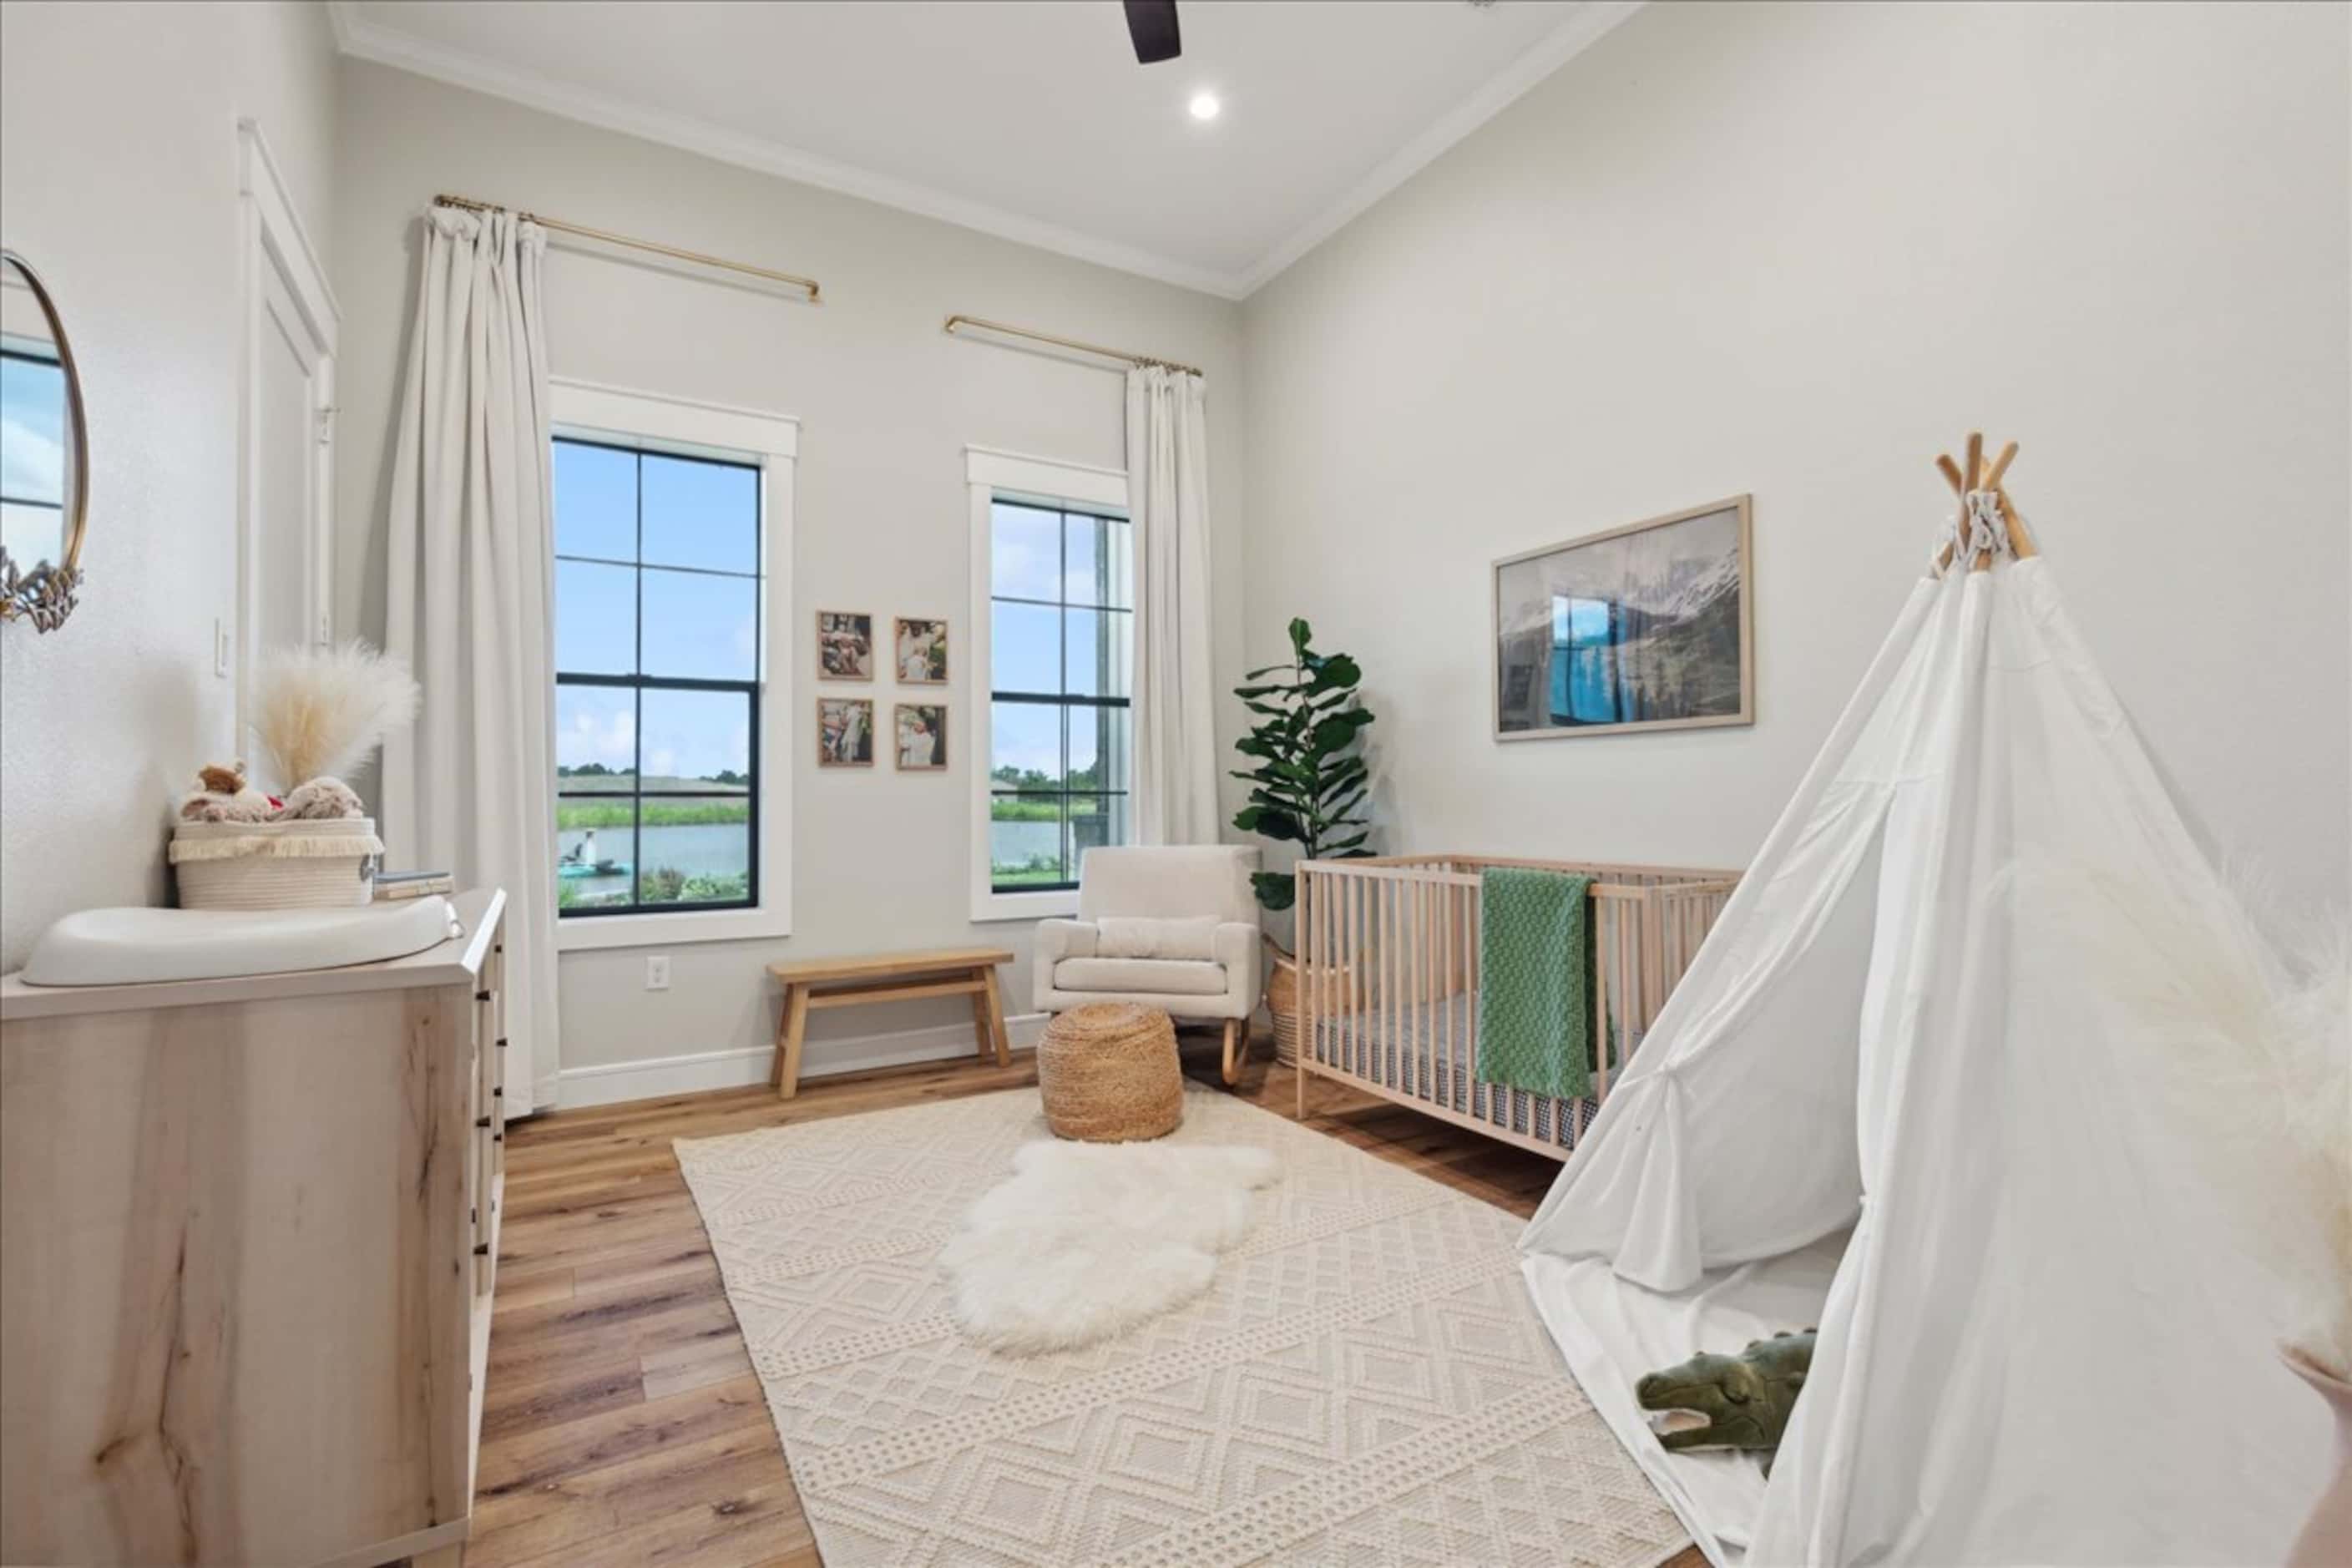 Child's bedroom with crib and teepee